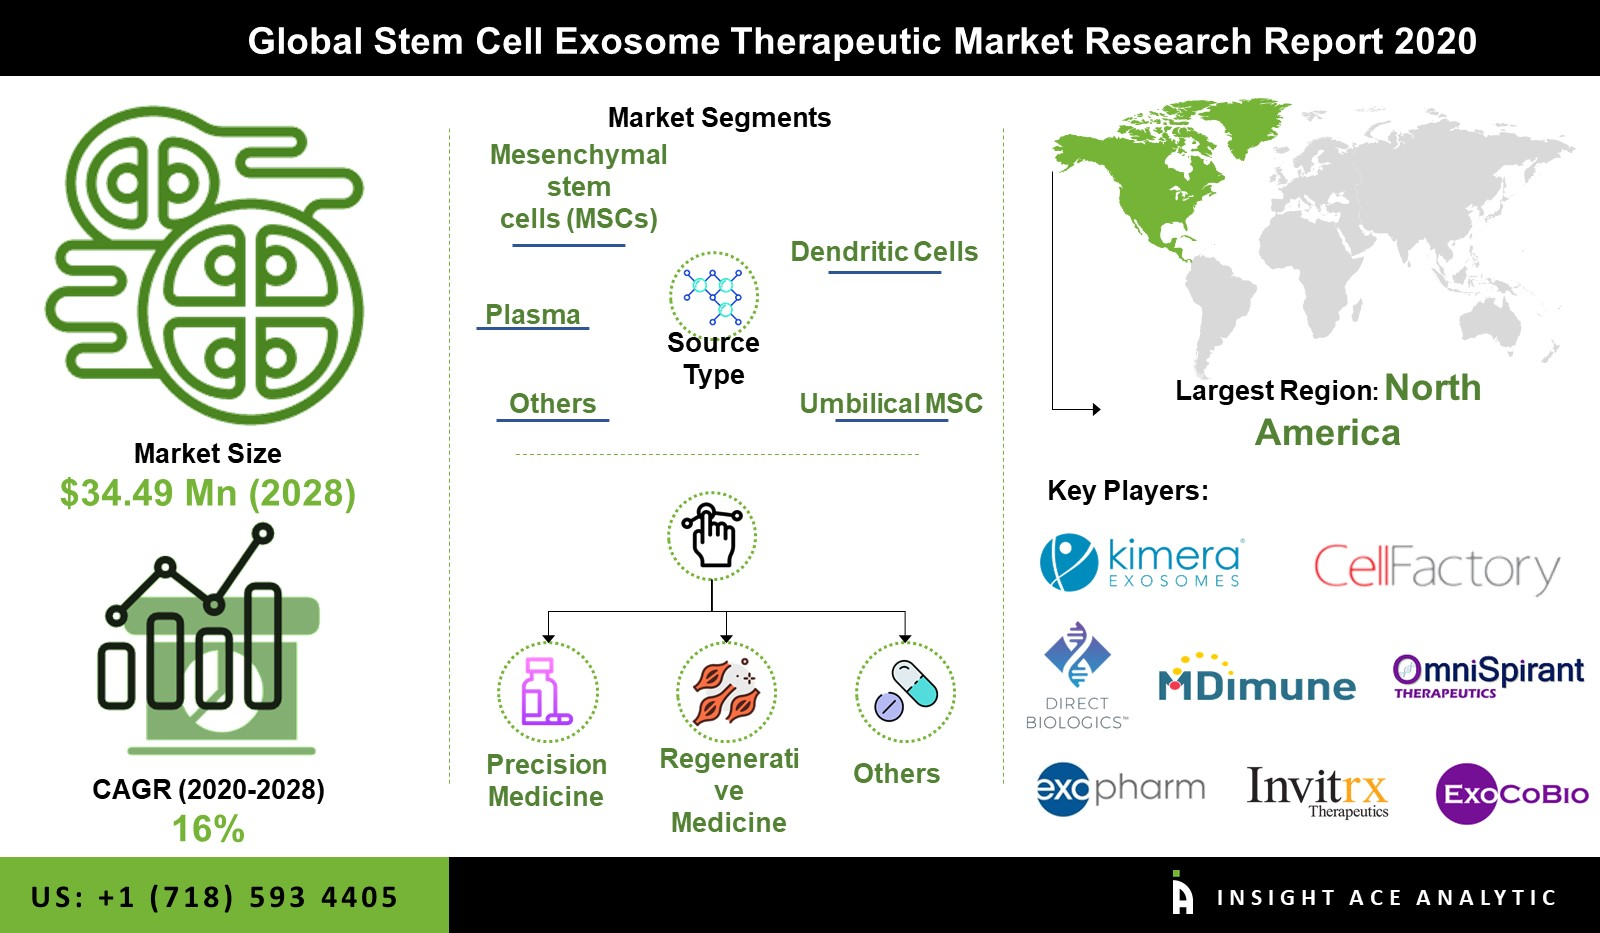 Global Stem Cell Exosome Therapeutic Market'